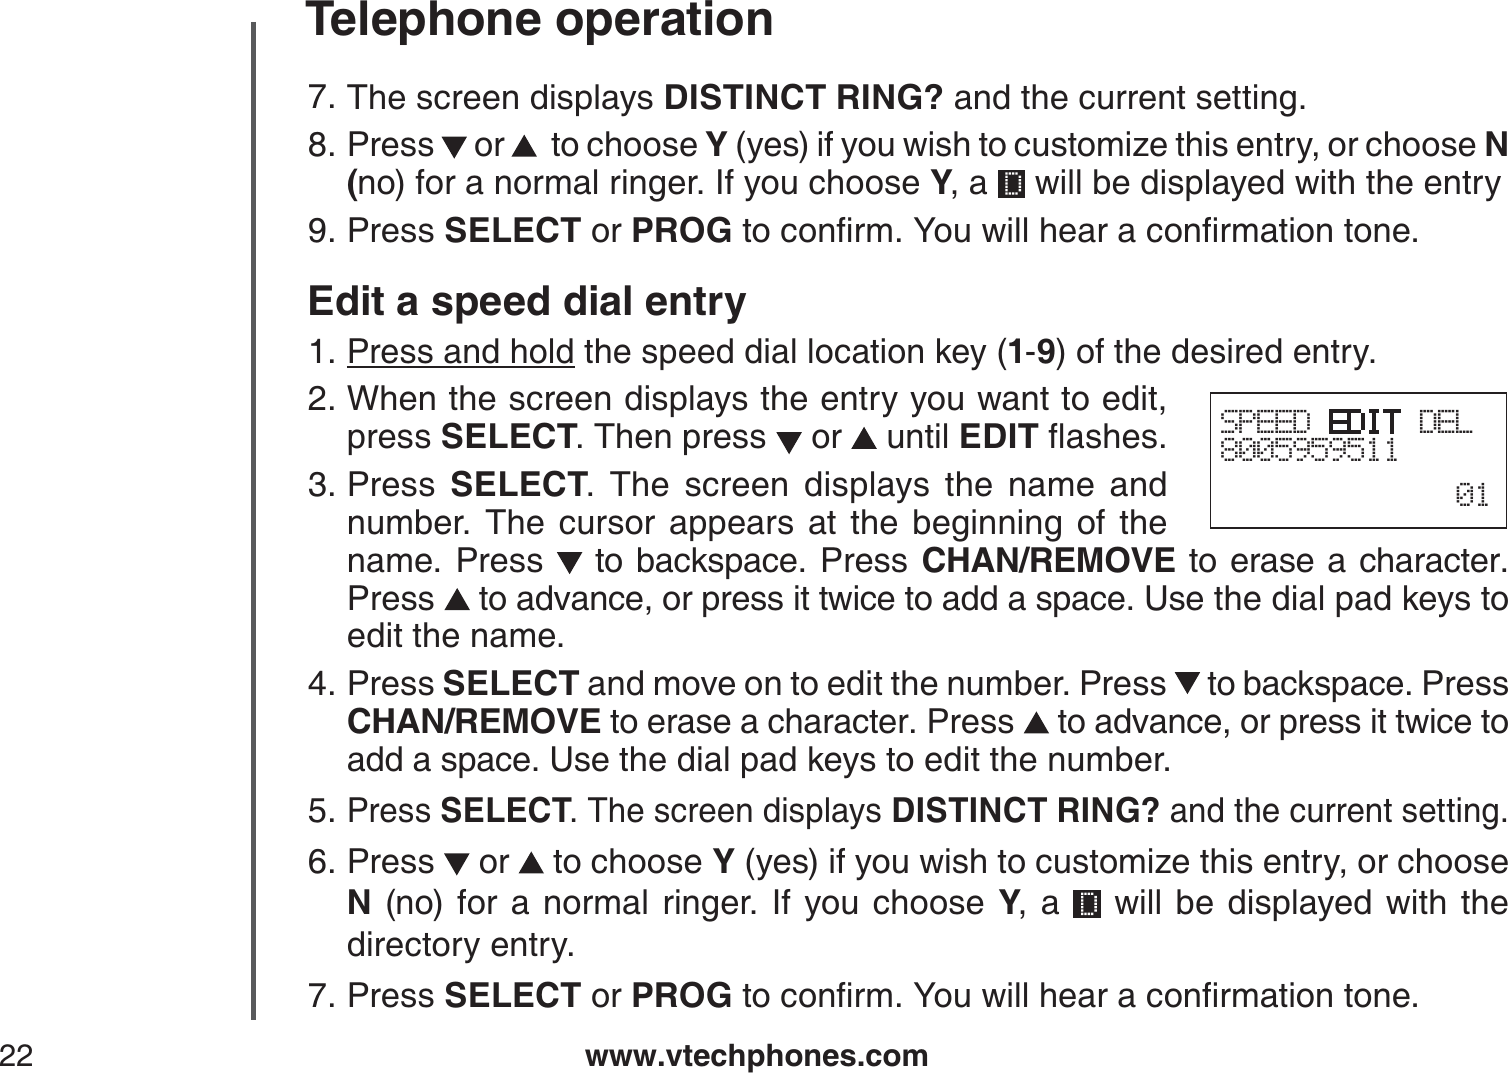 www.vtechphones.com22Telephone operationThe screen displays DISTINCT RING? and the current setting.Press   or    to choose Y (yes) if you wish to customize this entry, or choose N(no) for a normal ringer. If you choose Y, a   will be displayed with the entryPress SELECT or PROGVQEQPſTO;QWYKNNJGCTCEQPſTOCVKQPVQPGEdit a speed dial entryPress and hold the speed dial location key (1-9) of the desired entry.When the screen displays the entry you want to edit, press SELECT. Then press   or   until EDITƀCUJGUPress  SELECT. The screen displays the name and number. The cursor appears at the beginning of the name. Press   to backspace. Press CHAN/REMOVE to erase a character.Press  to advance, or press it twice to add a space. Use the dial pad keys to edit the name. Press SELECT and move on to edit the number. Press   to backspace. Press CHAN/REMOVE to erase a character. Press   to advance, or press it twice to add a space. Use the dial pad keys to edit the number.Press SELECT. The screen displays DISTINCT RING? and the current setting.Press   or   to choose Y (yes) if you wish to customize this entry, or choose N (no) for a normal ringer. If you choose Y, a   will be displayed with the directory entry.Press SELECT or PROGVQEQPſTO;QWYKNNJGCTCEQPſTOCVKQPVQPG7.8.9.1.2.3.4.5.6.7.SPEED EDIT DEL800595951101